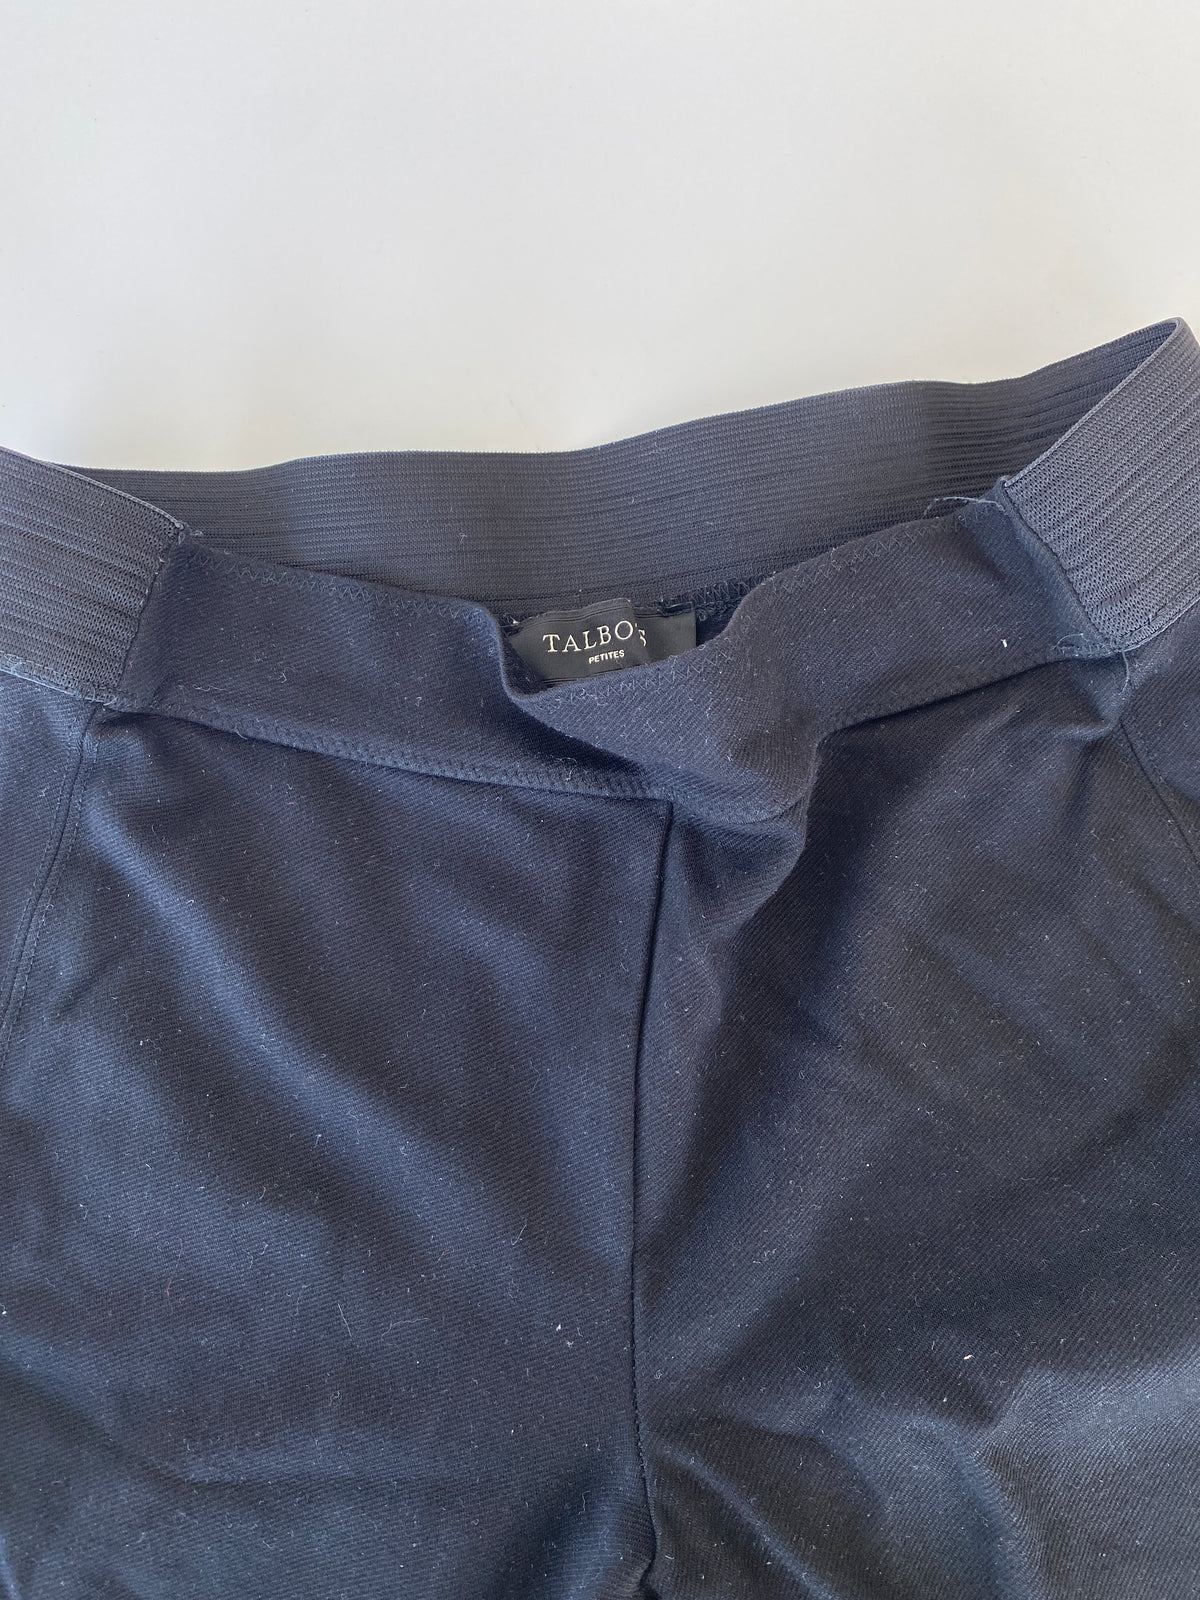 Talbot's- Basic Black Pants with Stretchy Waistband